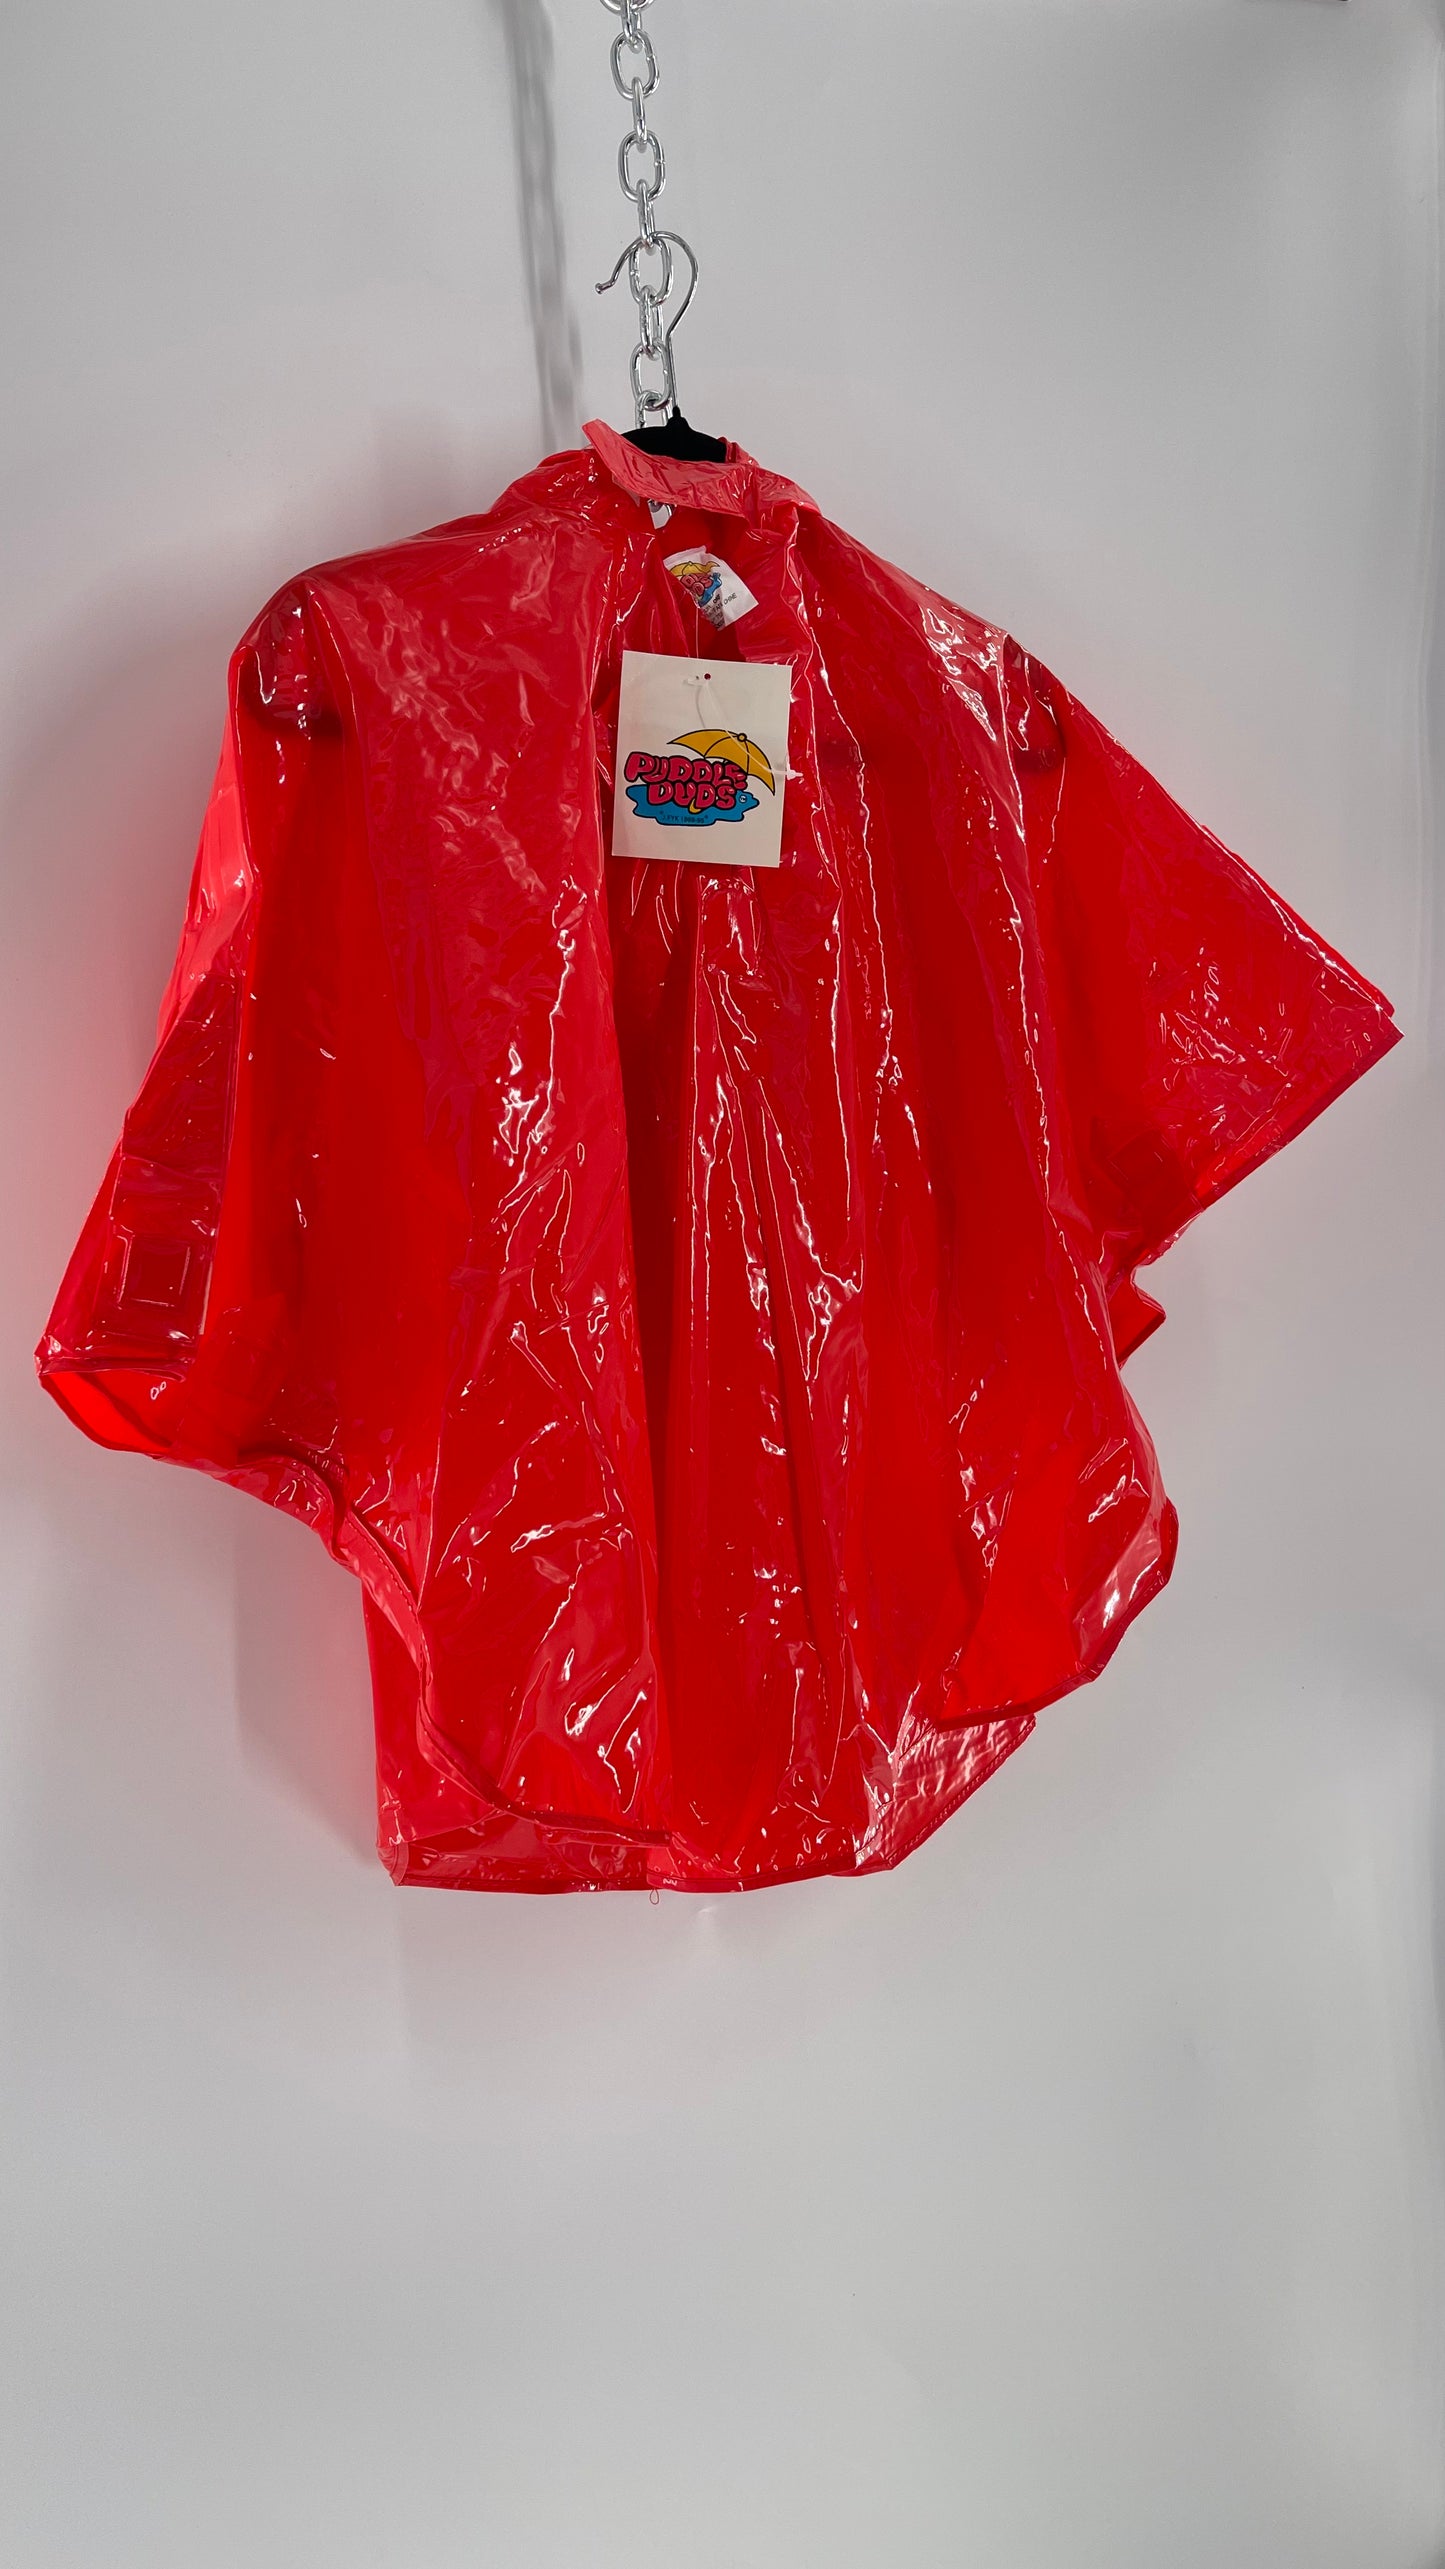 Deadstock Vintage Puddle Duds Puppy Rain Poncho with Dog Hood and Floppy Ears ‘90s (One Size)